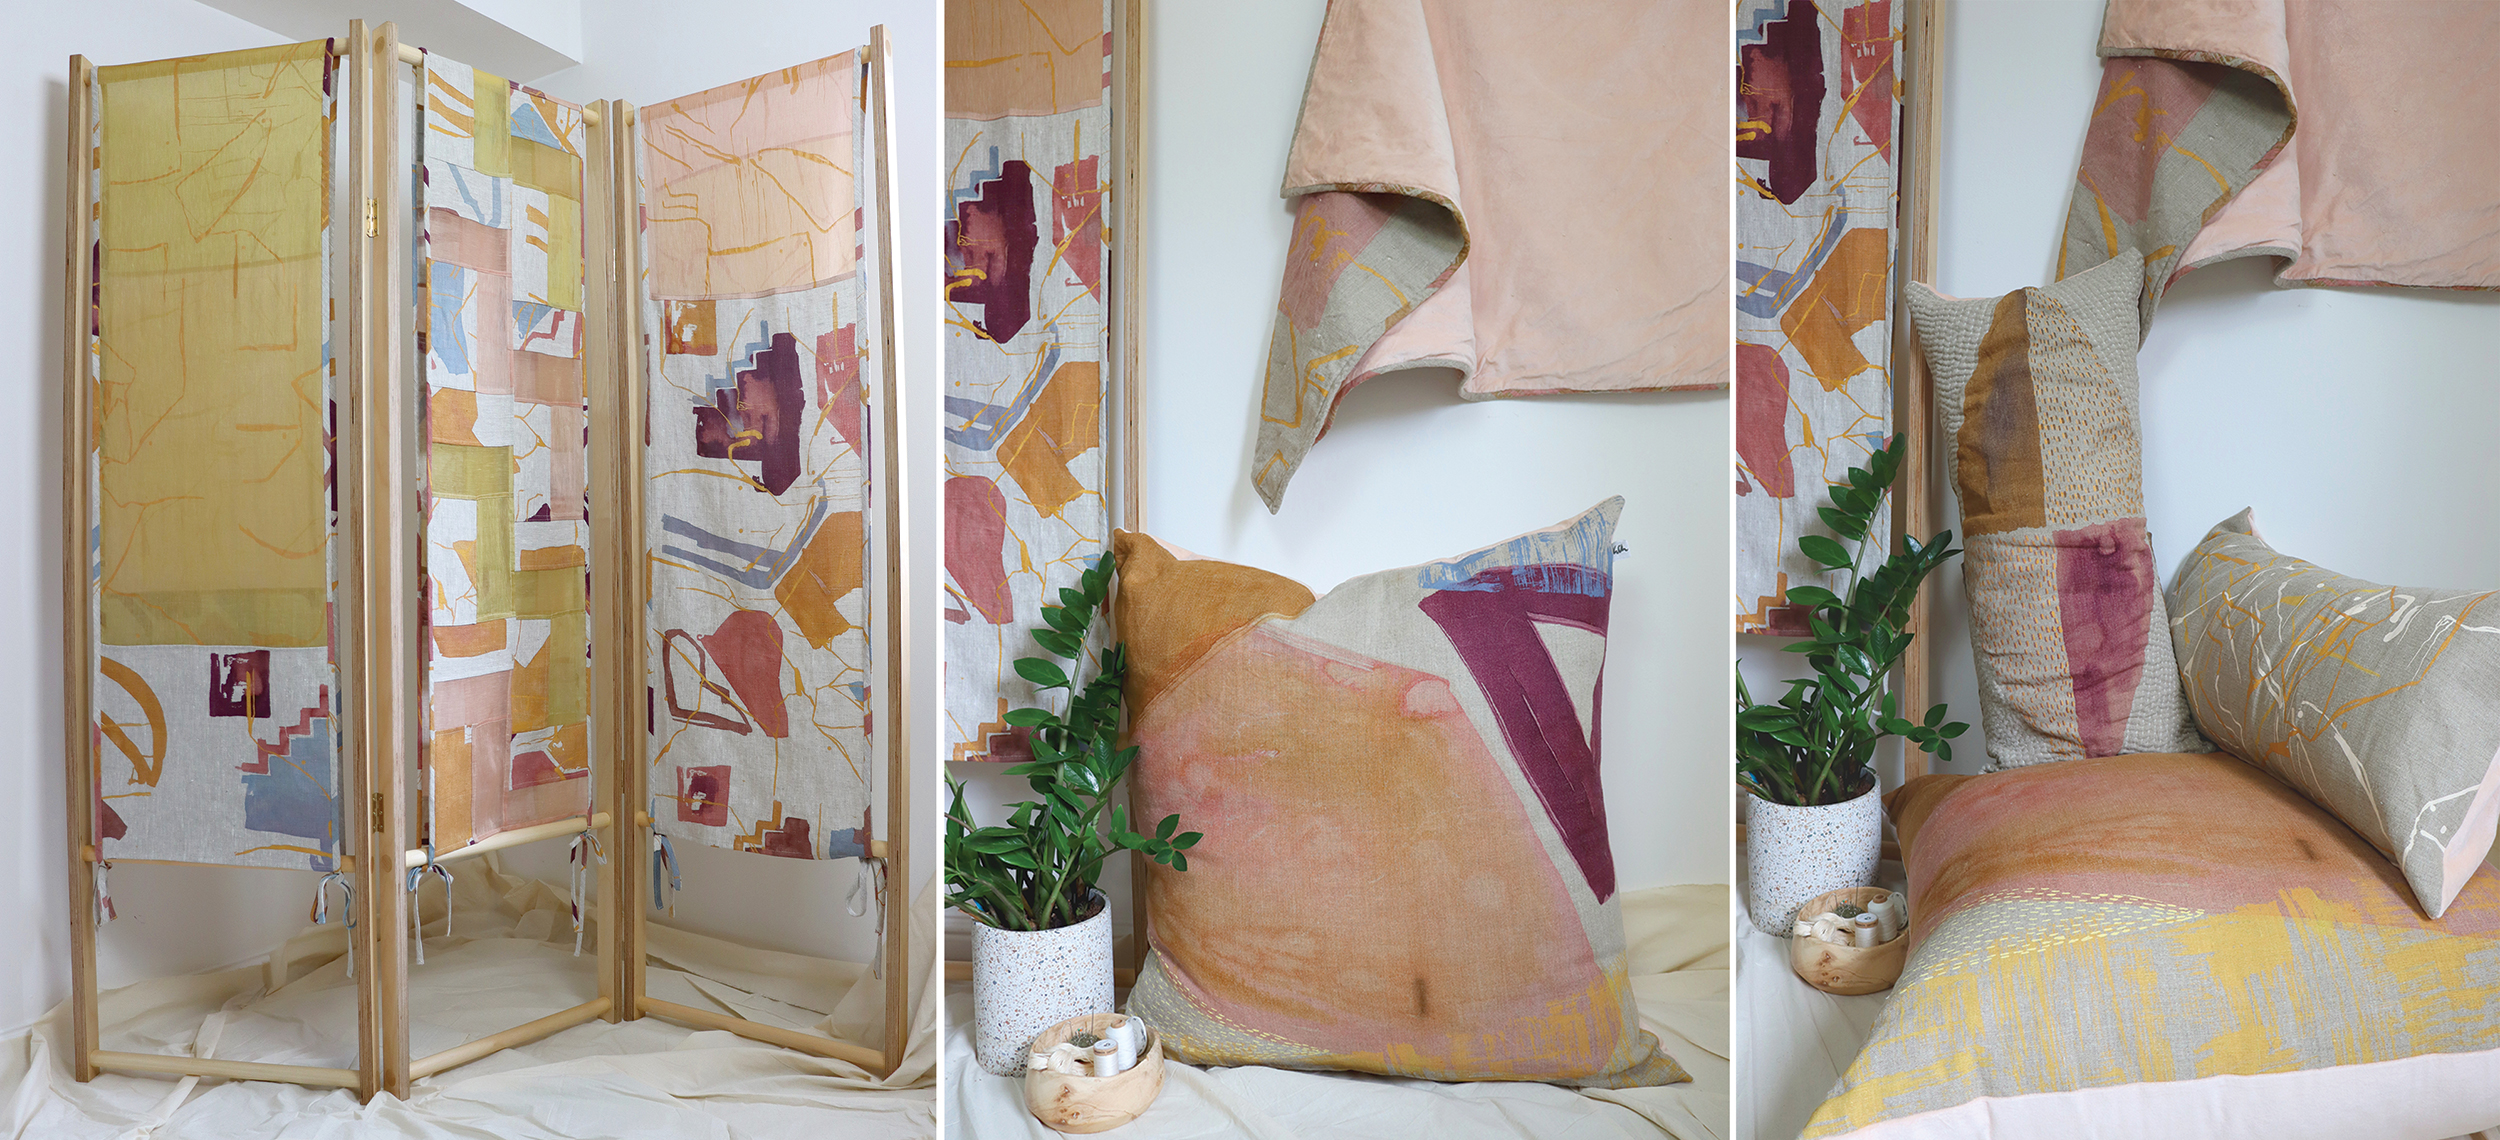 M Katie Charleson’s latest collection of homewares, hand painted, screen printed, and dyed on natural fibers.